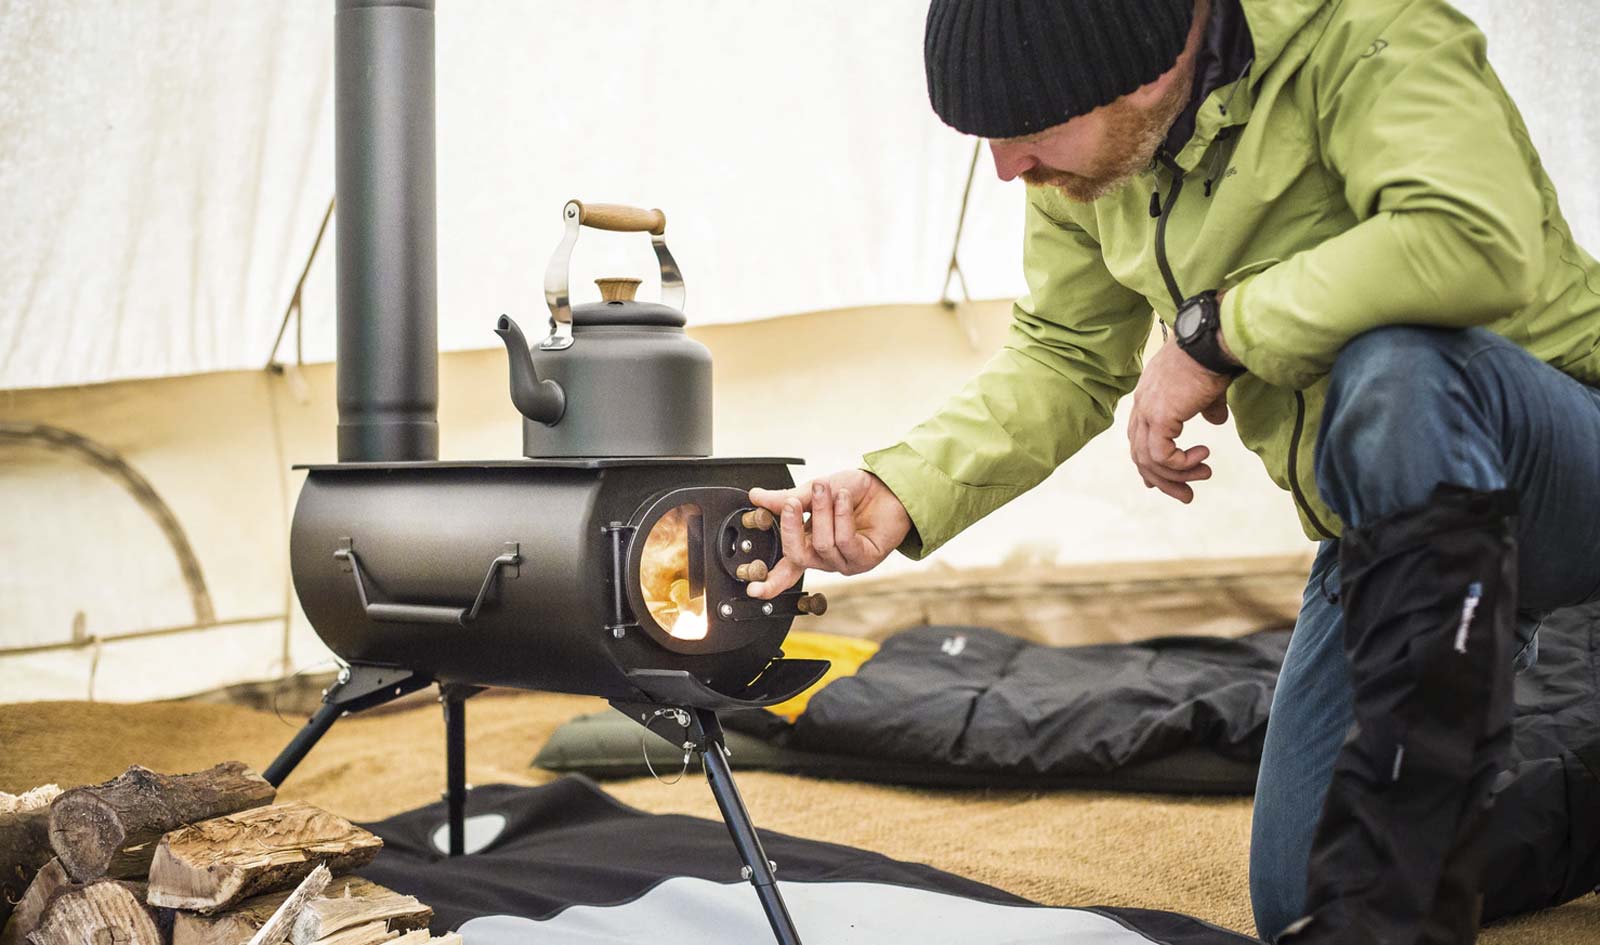 How to choose a perfect heater for camping